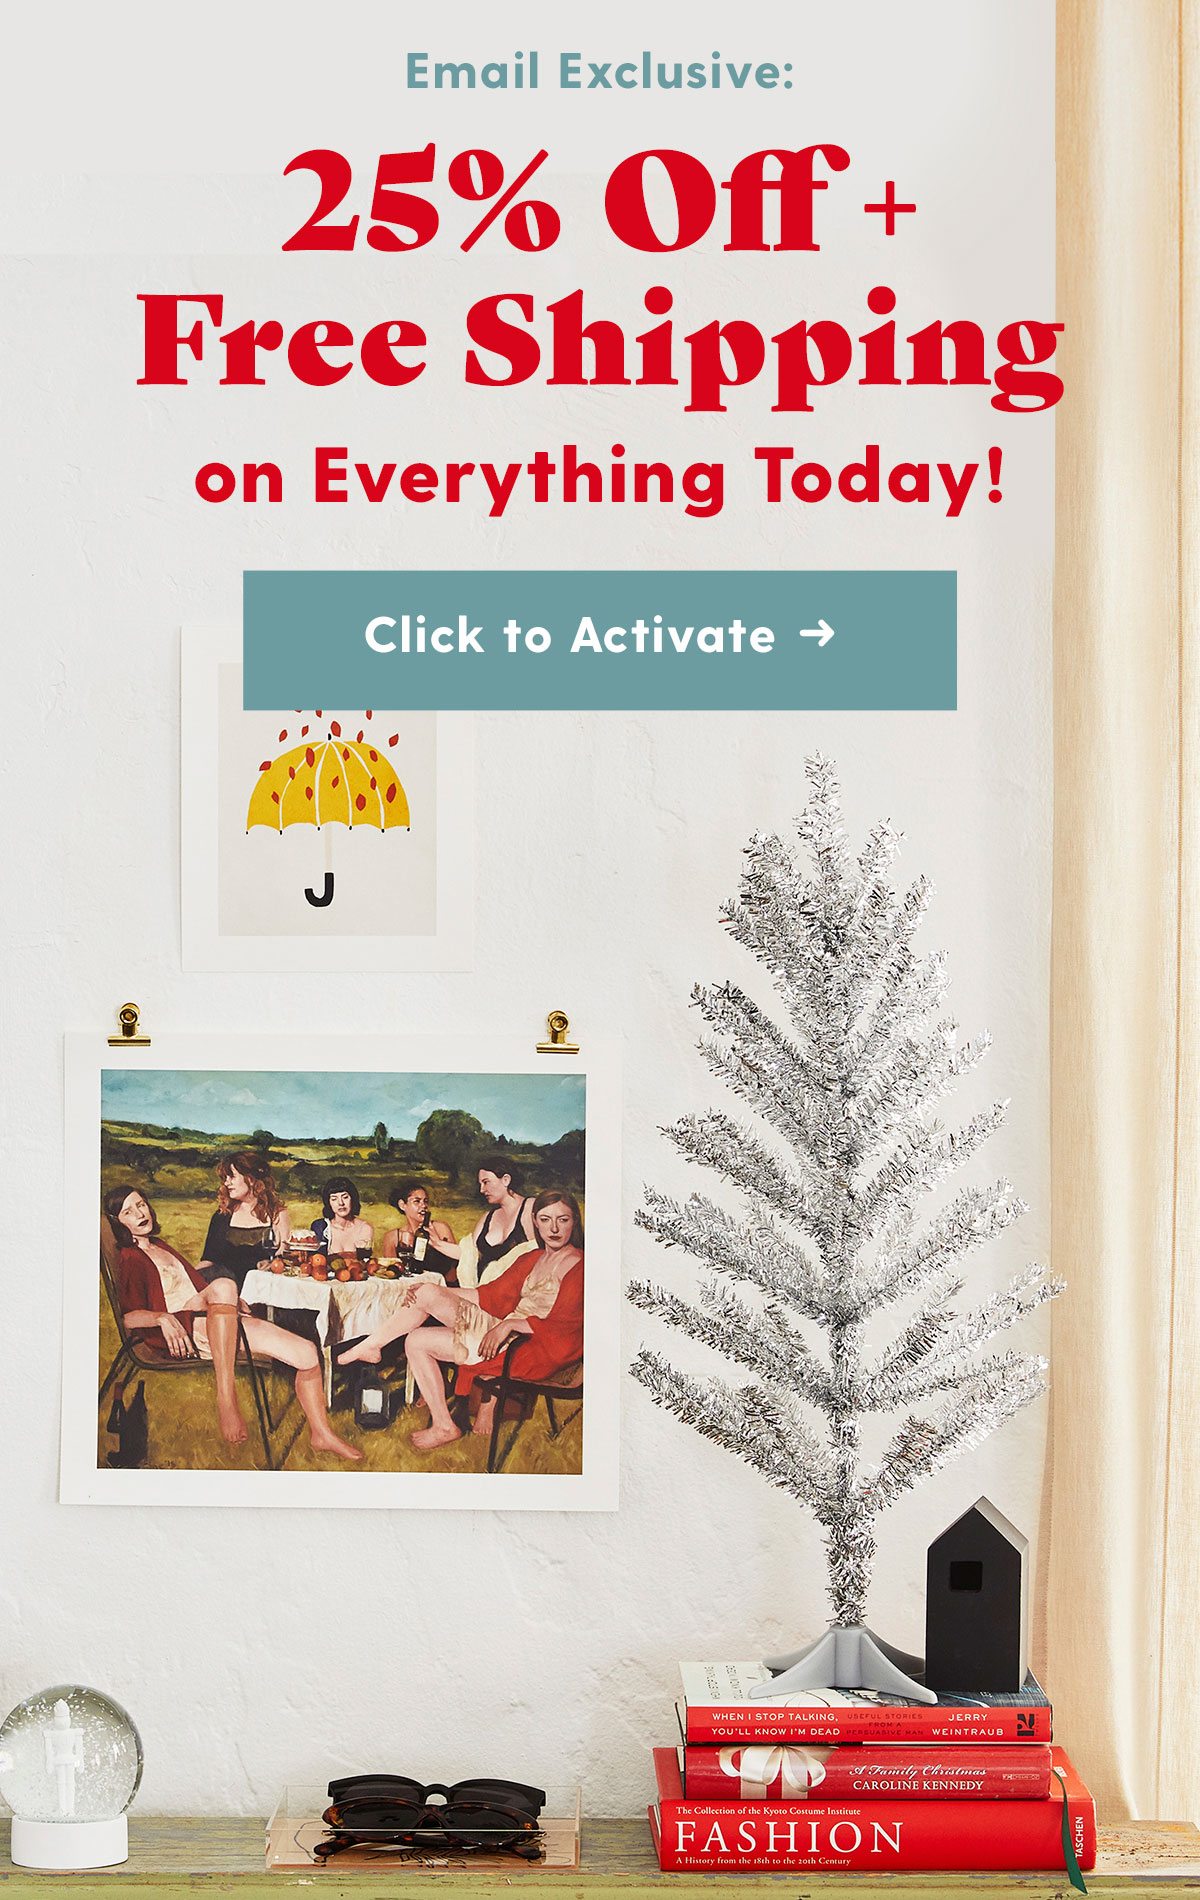 Email Exclusive25% Off + Free Shipping on Everything Today! Click to Activate →